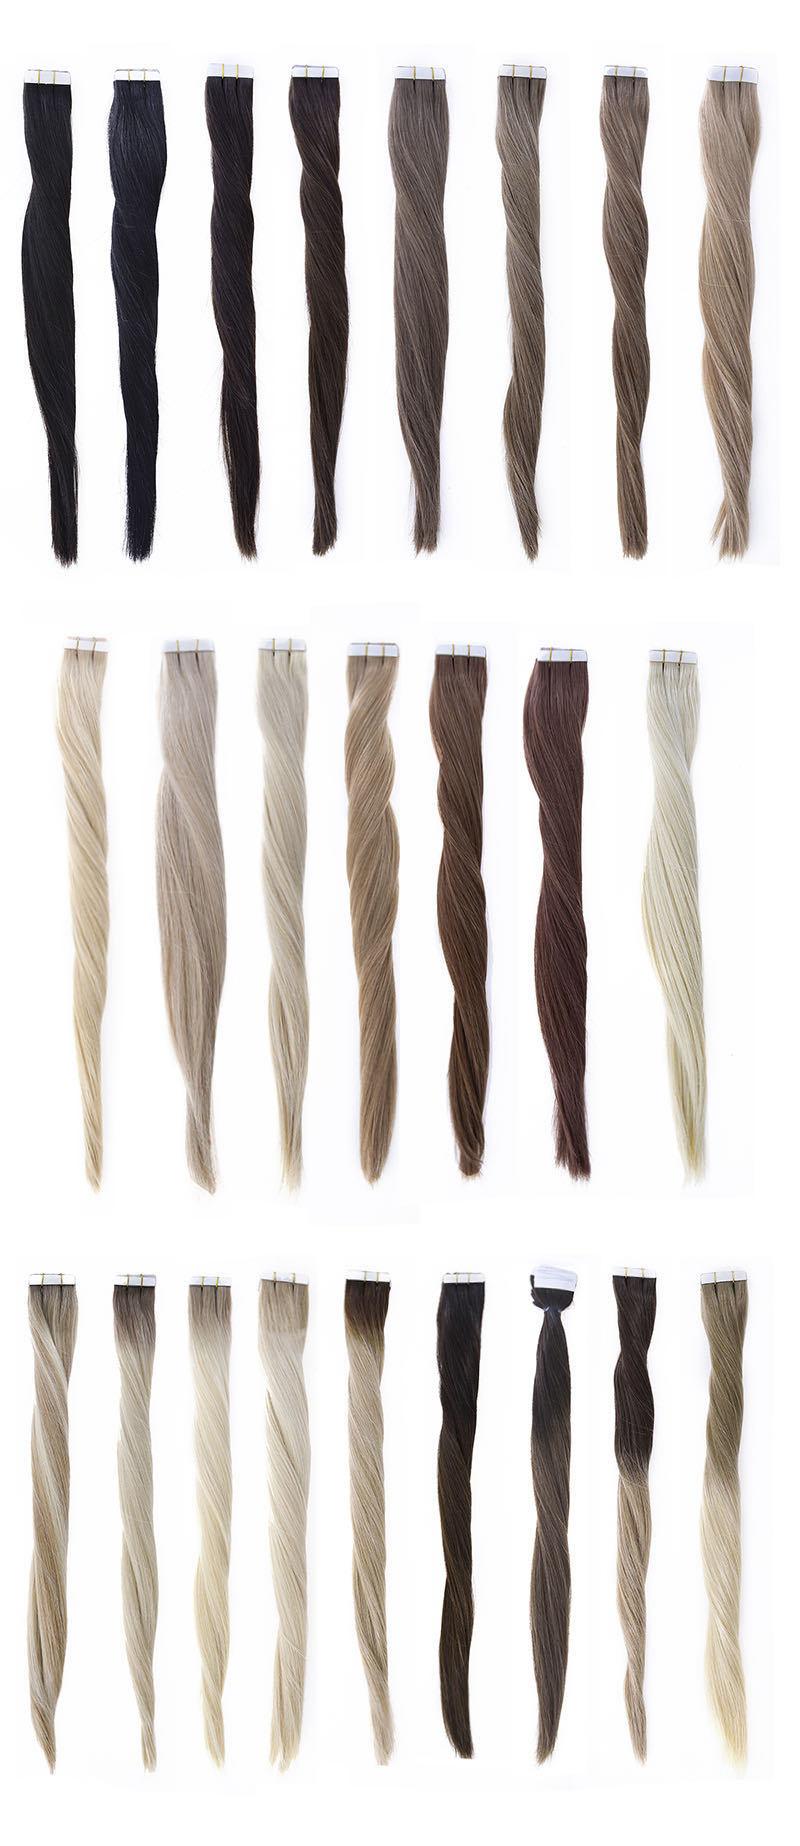 Tape in Hair Extensions Human Hair Natural Ombre Ash Blonde to Golden Blonde and Platinum Blonde Hair Extensions 24 Inch Remy Human Hair Extensions 20PCS 50g